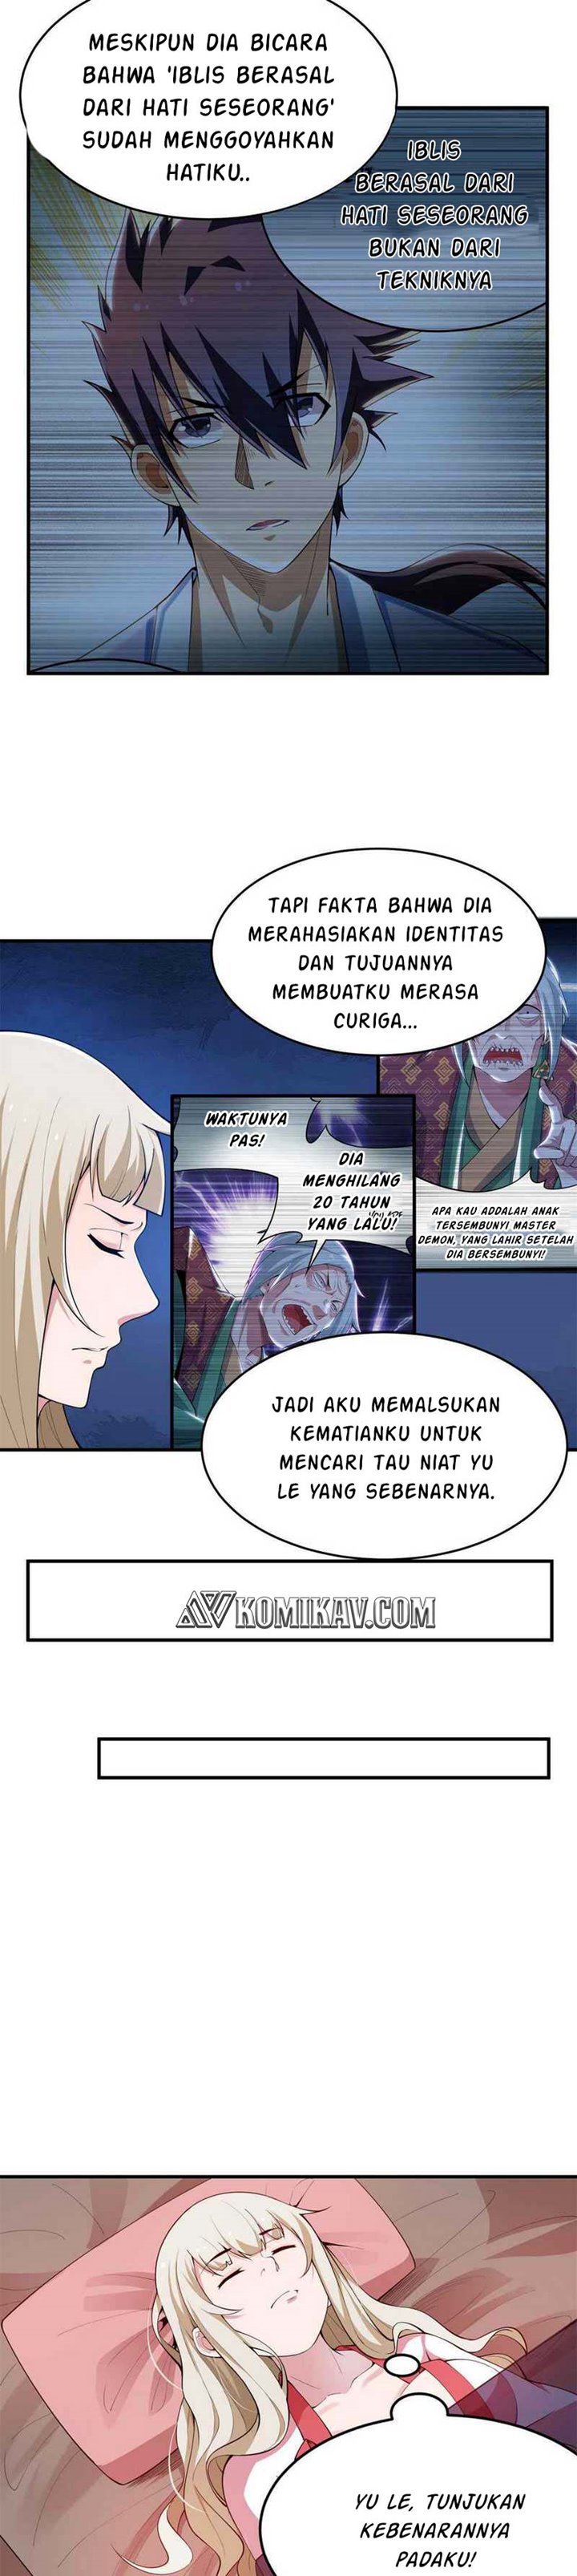 Dilarang COPAS - situs resmi www.mangacanblog.com - Komik i just want to be beaten to death by everyone 020 - chapter 20 21 Indonesia i just want to be beaten to death by everyone 020 - chapter 20 Terbaru 8|Baca Manga Komik Indonesia|Mangacan